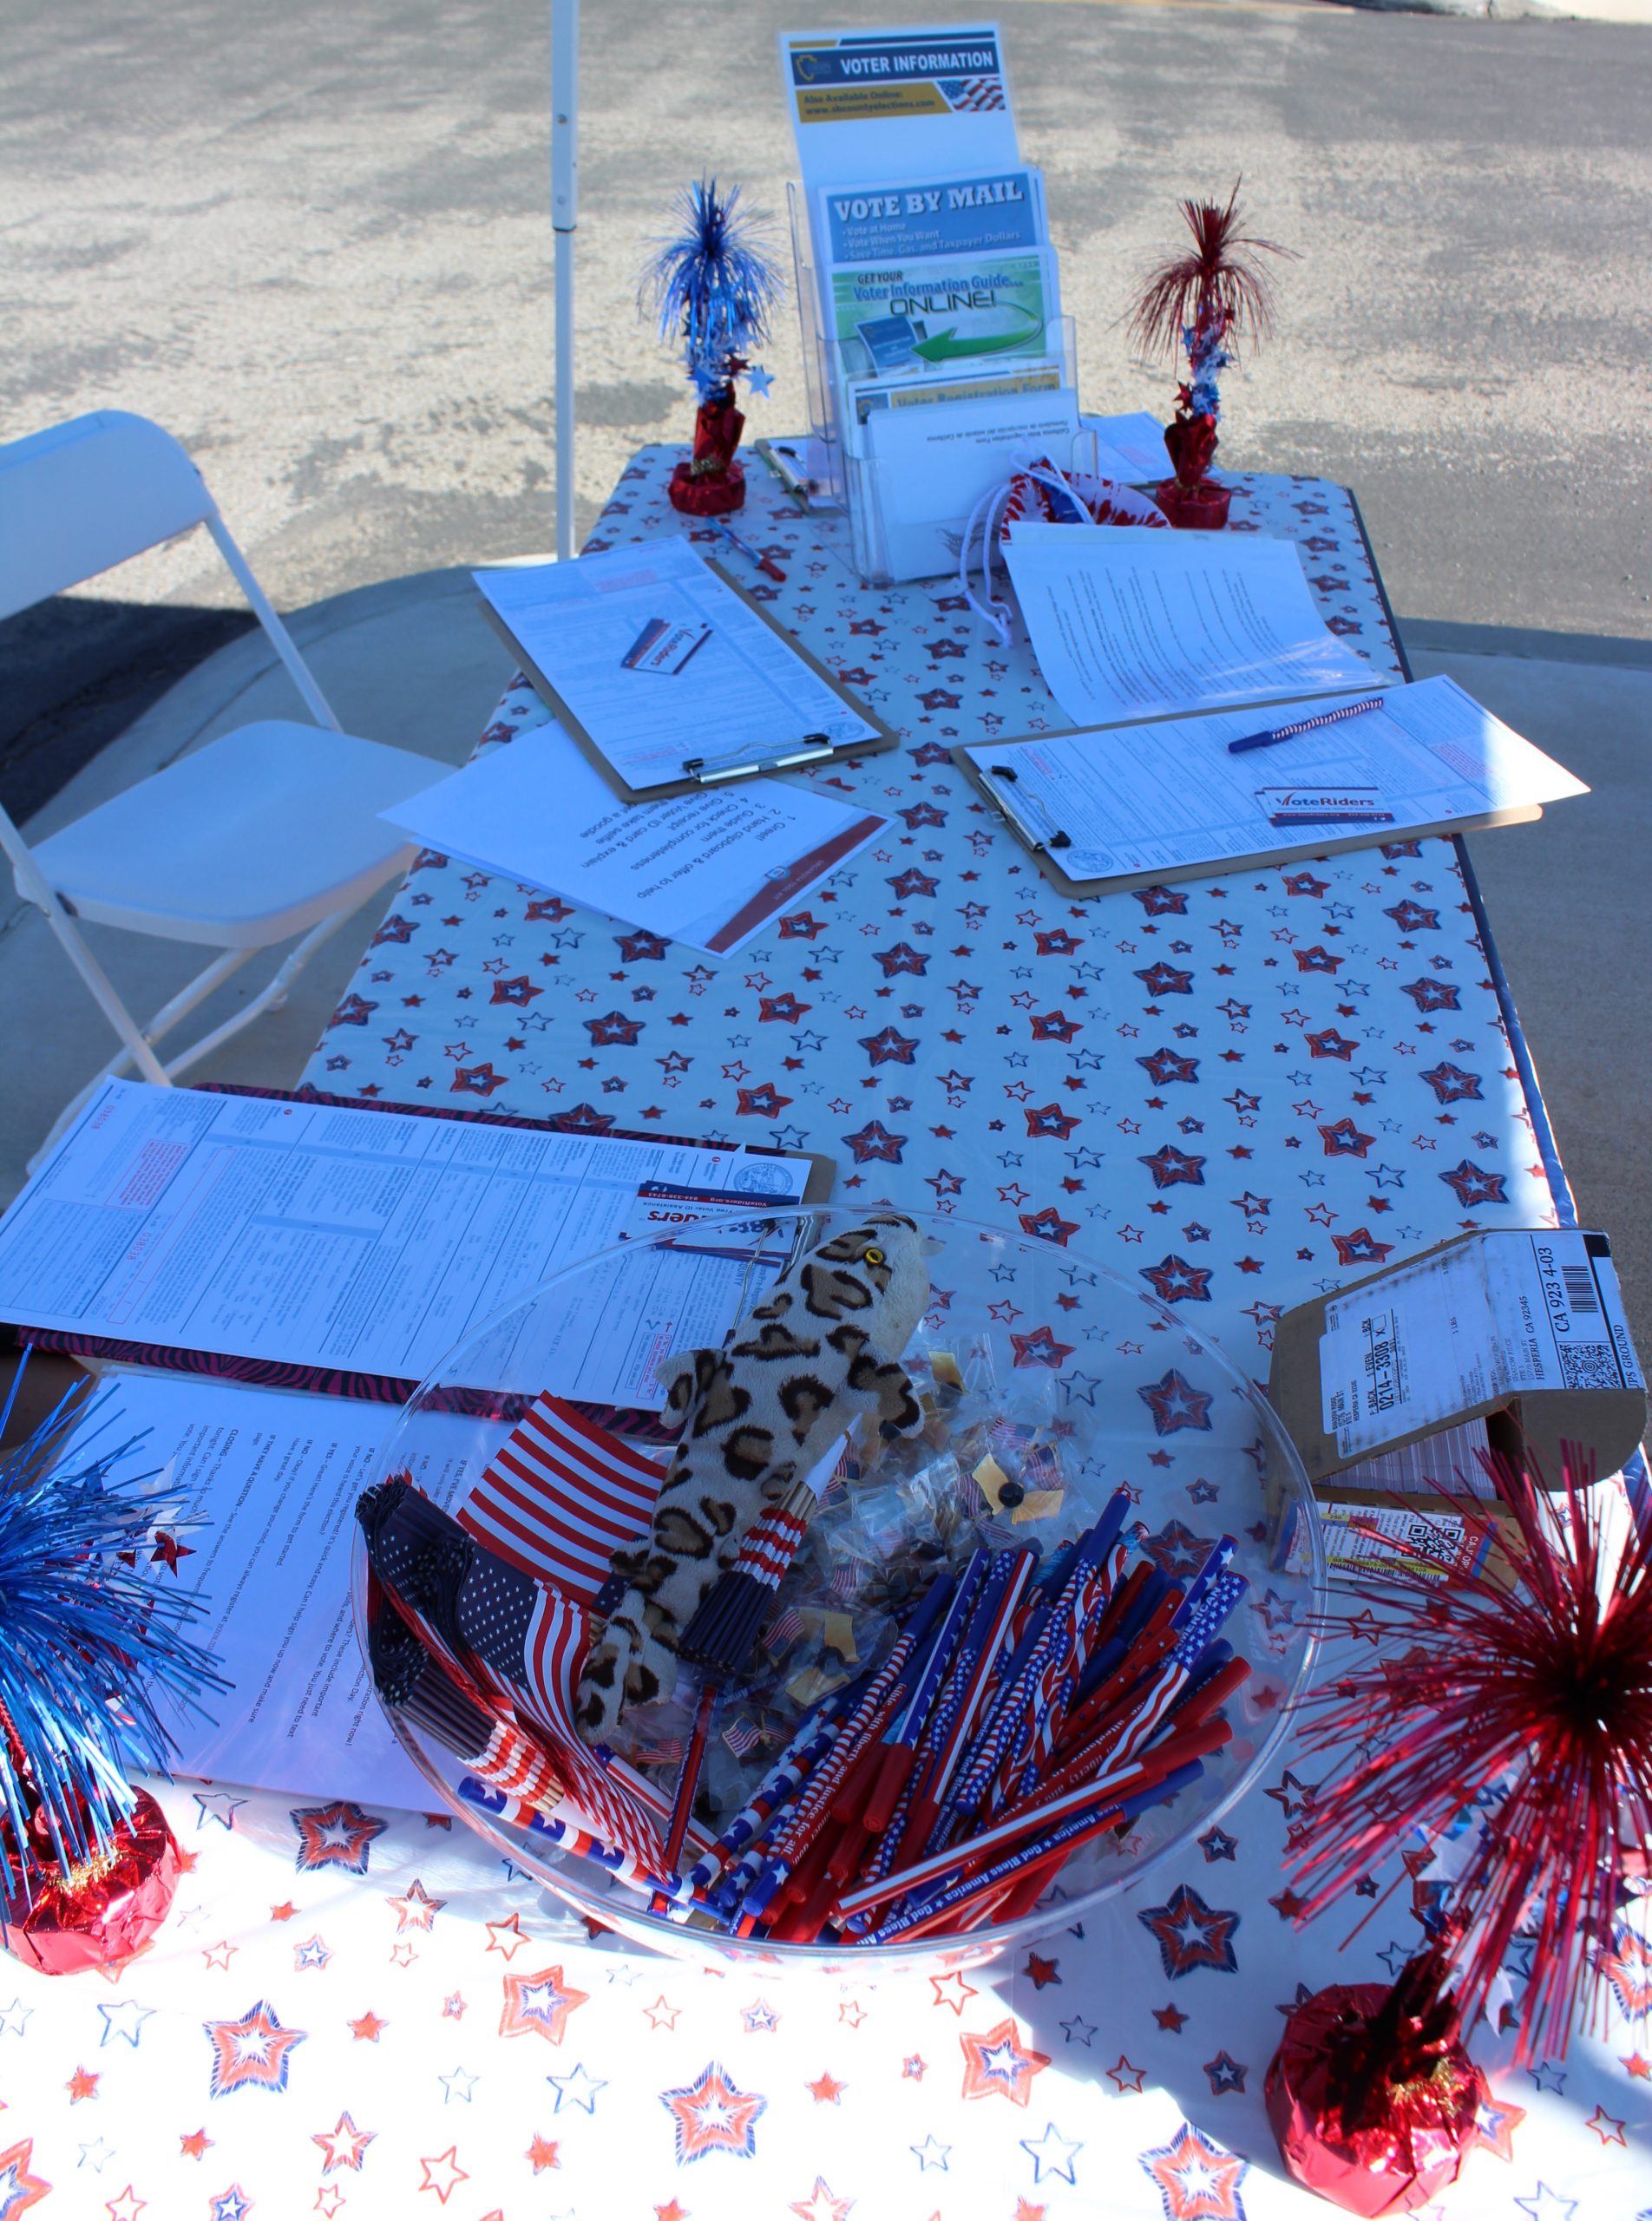 table with resources in order to register to vote